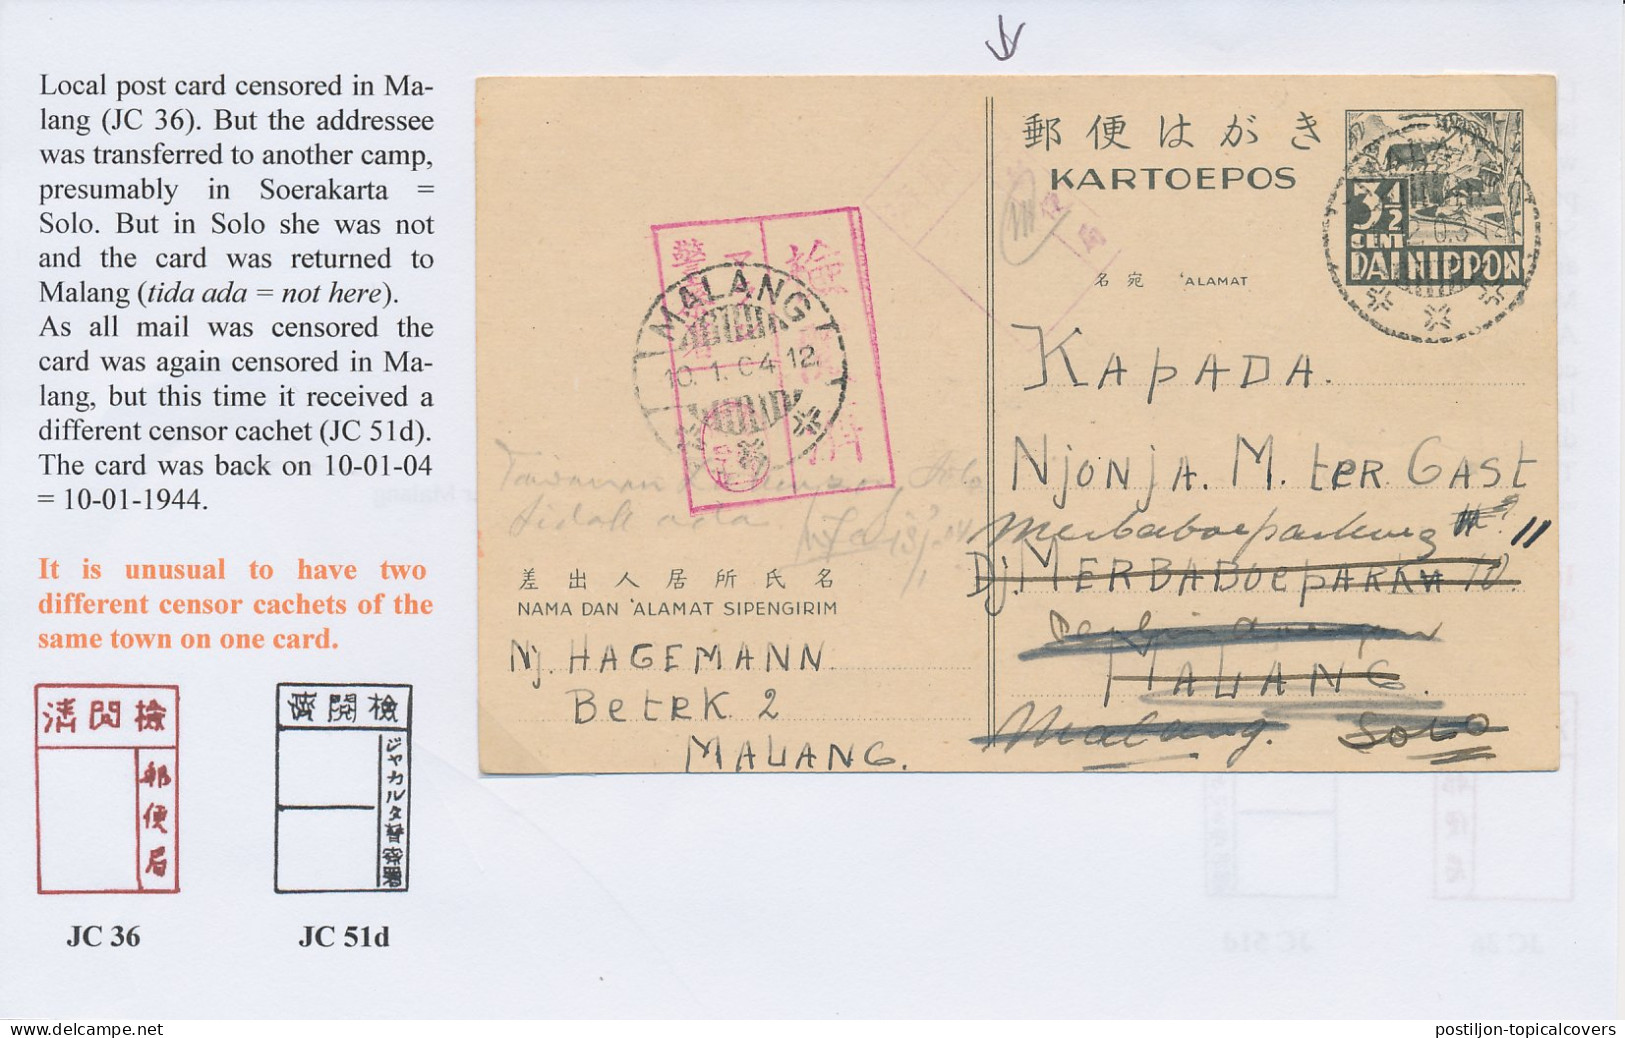 Censored Local Post Card To A Camp In Malang Neth. Indies 1944 - Netherlands Indies